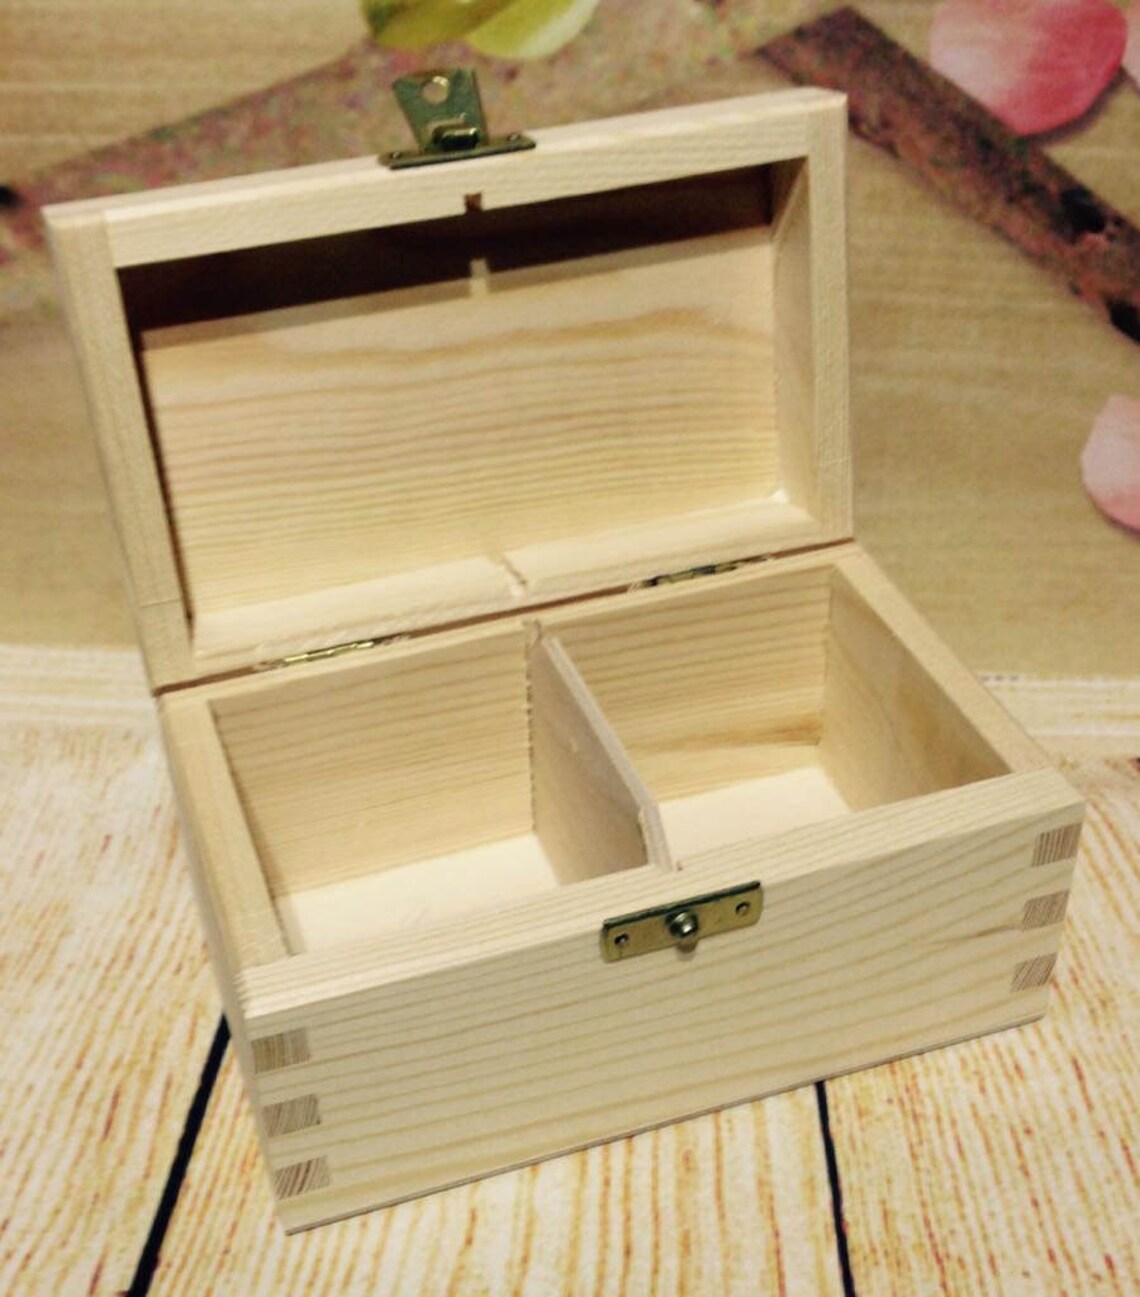 Laser Engraved Wooden Tea Bag Box with Compartments - 2 Compartments